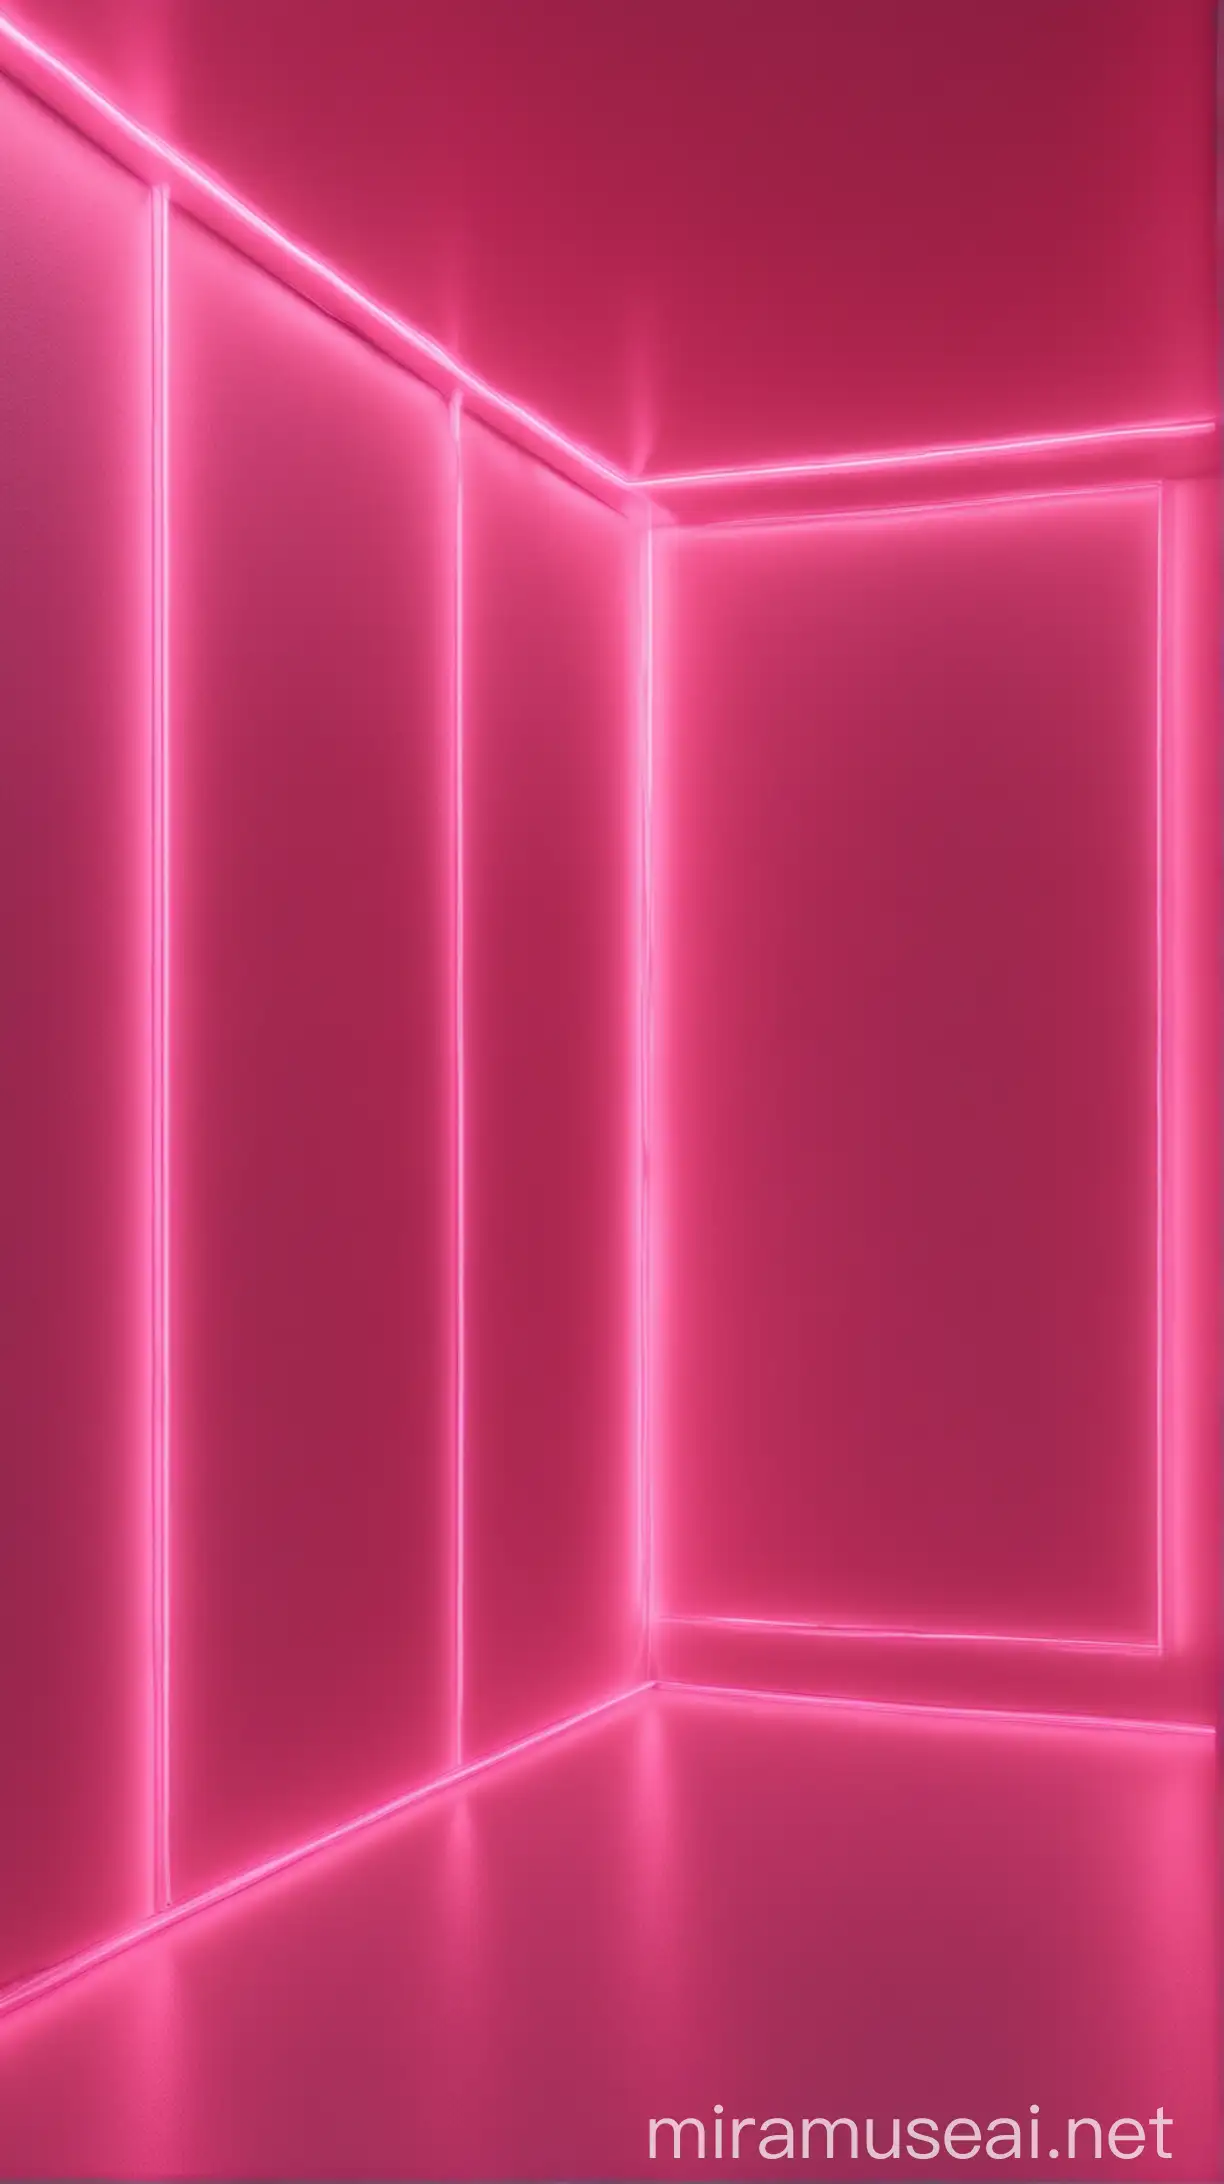 Futuristic 3D Room Design with Vibrant Hot Pink Neon Lines